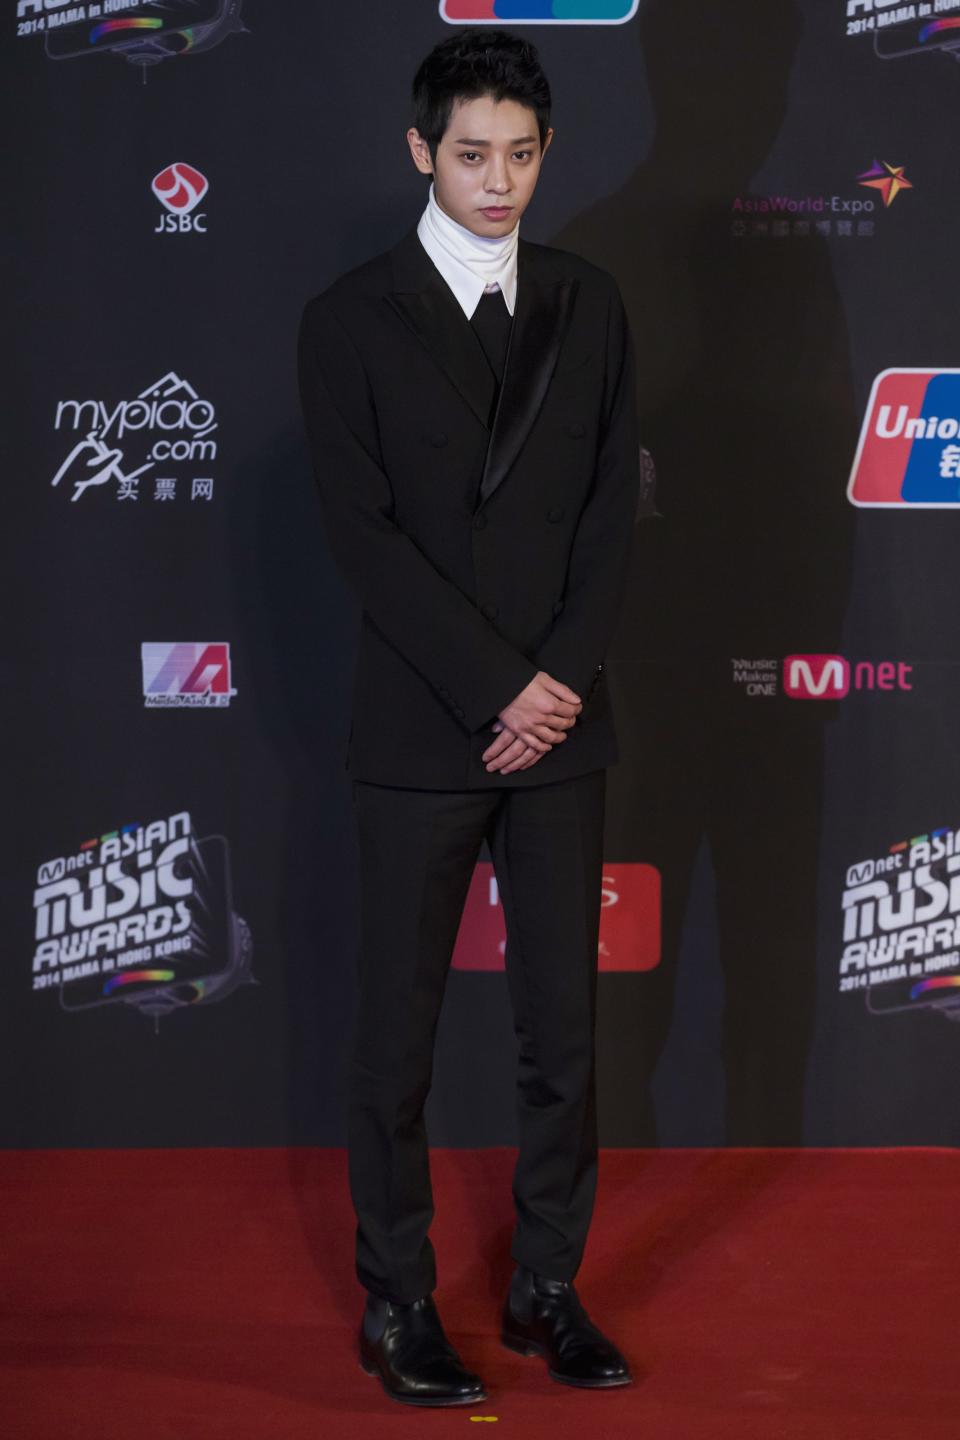 South Korean singer Jung Joon-young poses on the red carpet as he attends the 2014 Mnet Asian Music Awards (MAMA) in Hong Kong